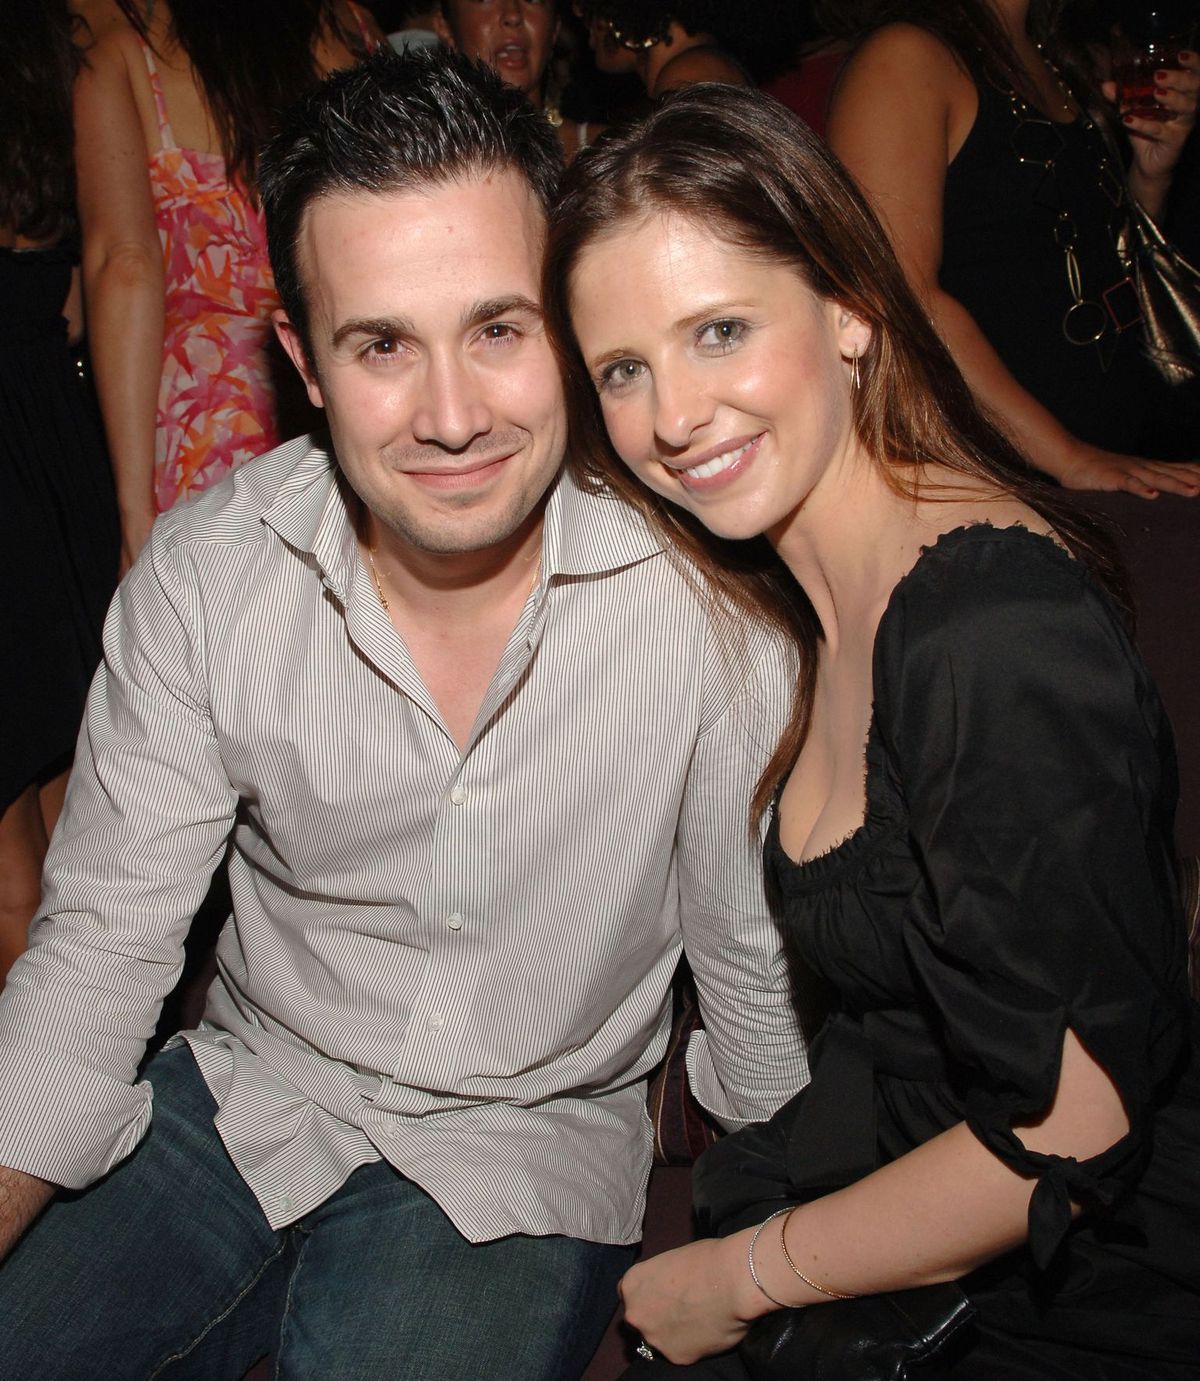 Freddie Prinze Jr. and Sarah Michelle Gellar at DJ Cassidy's 25th Birthday Party on July 12, 2006 | Photo: Getty Images